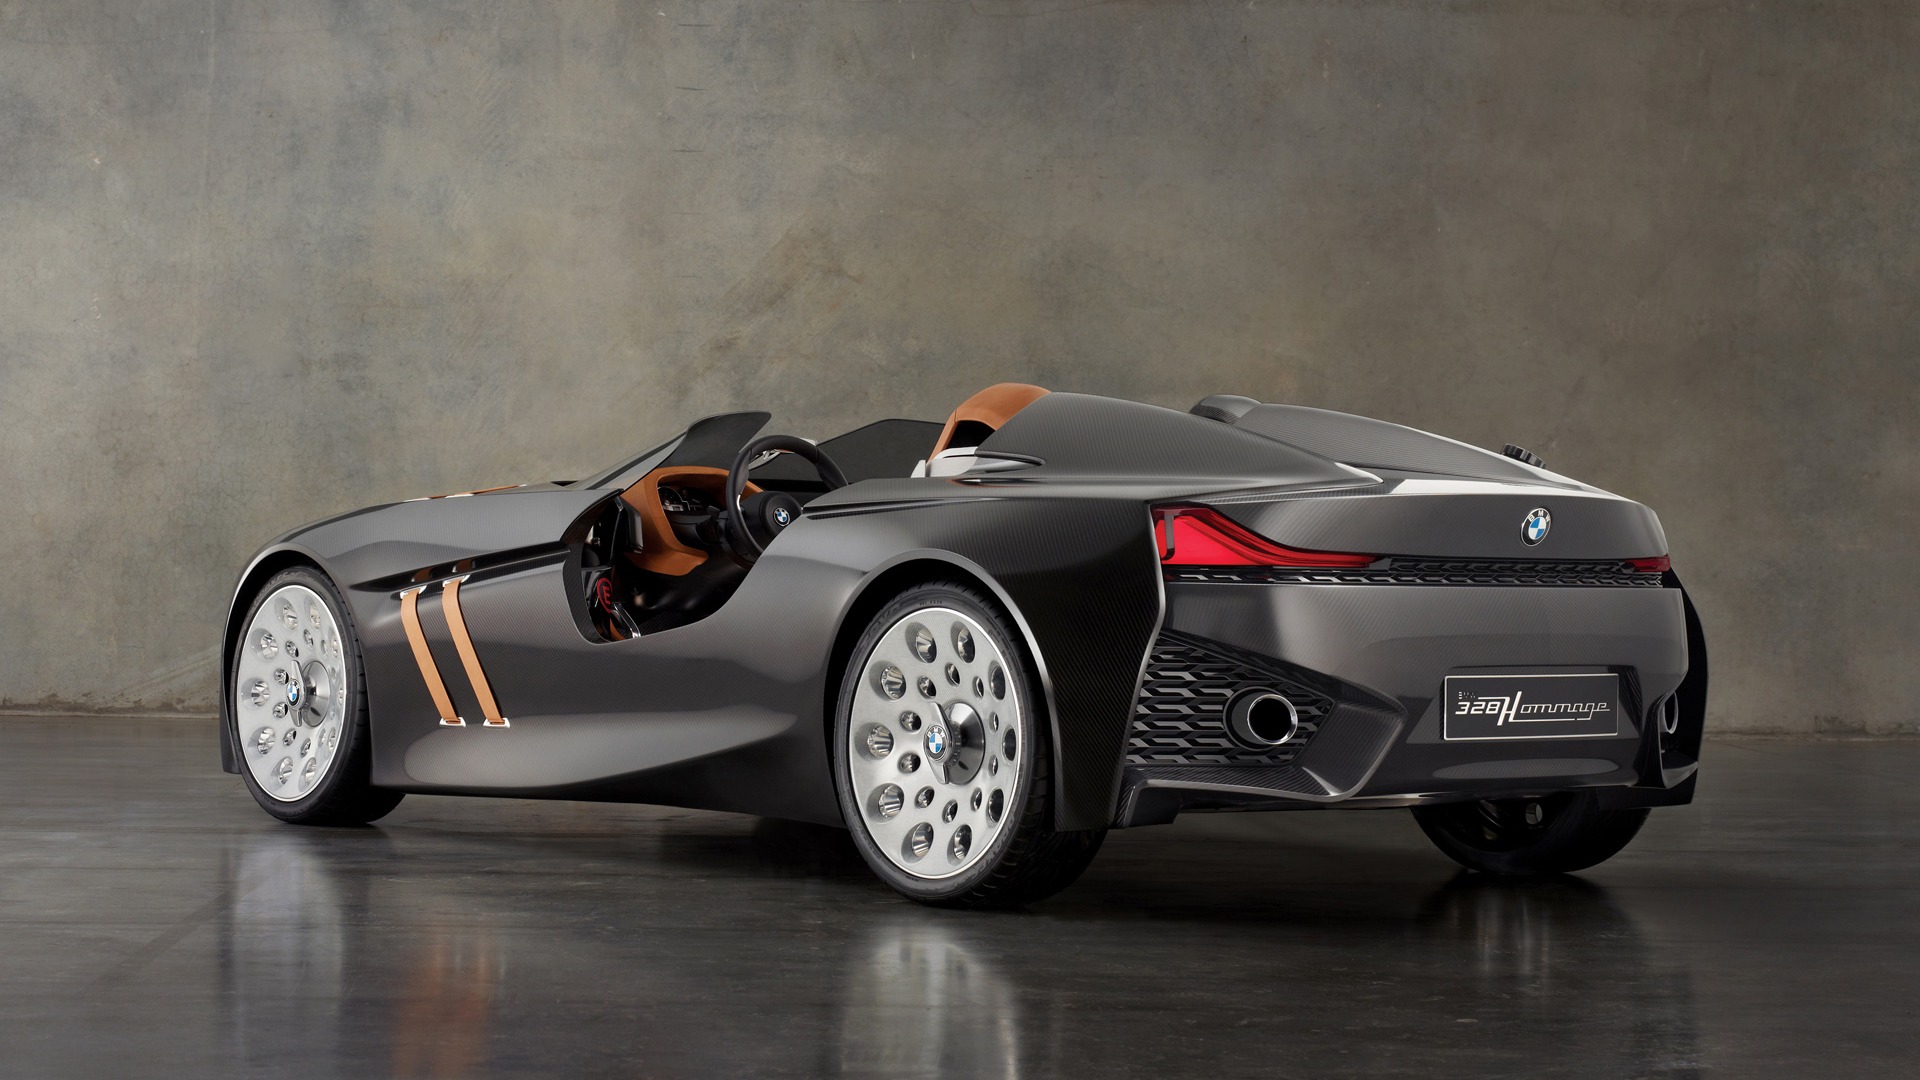 BMW 328 Hommage - 2011 HD wallpapers #32 - 1920x1080